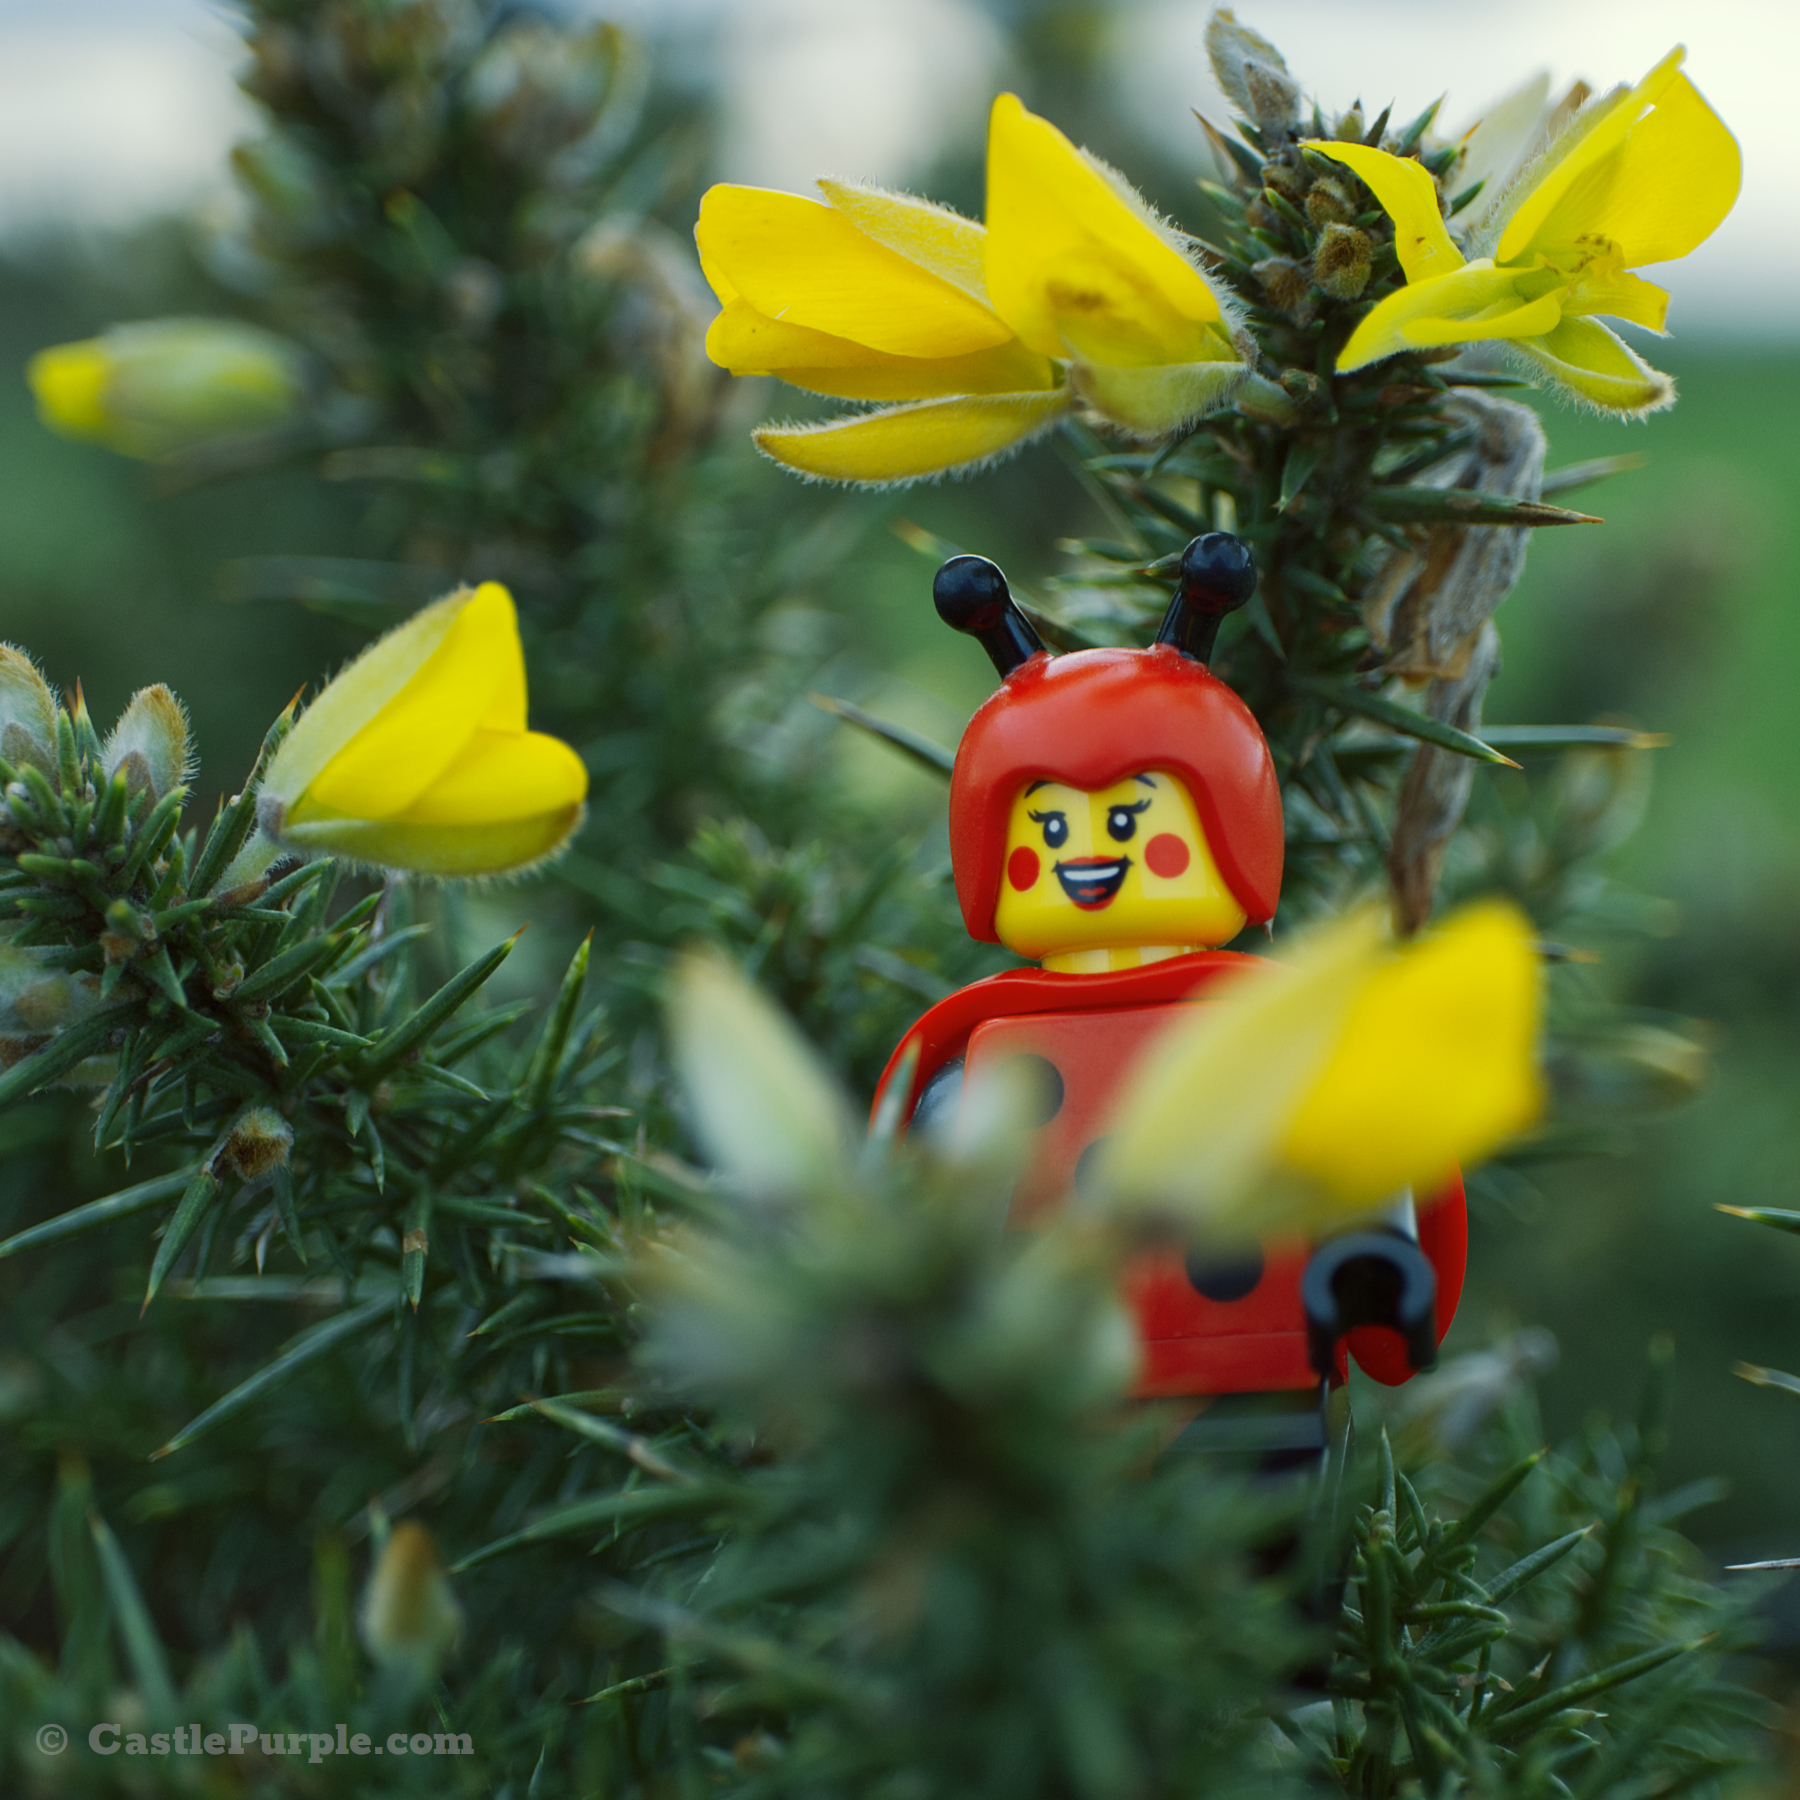 The Lego minifigure "Ladybug Girl" is pictured sitting between the spiky leaves of a gorse plant. The gorse has some yellow flowers which contrast nicely with her red outfit.